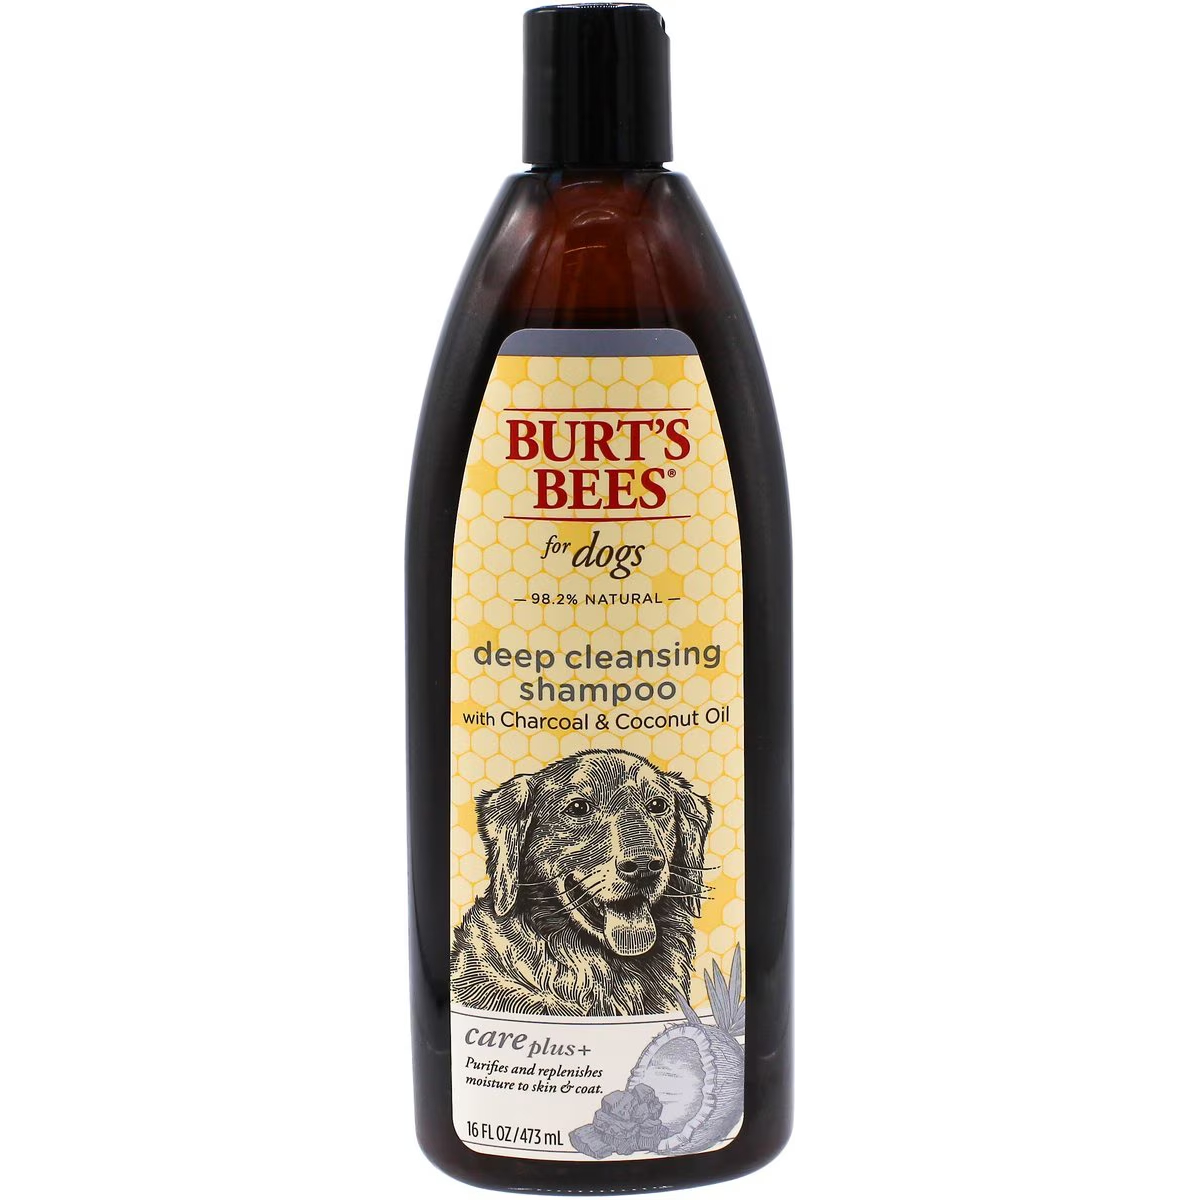 Burt's Bees Care Plus+ Deep Cleansing Charcoal & Coconut Oil Dog Shampoo